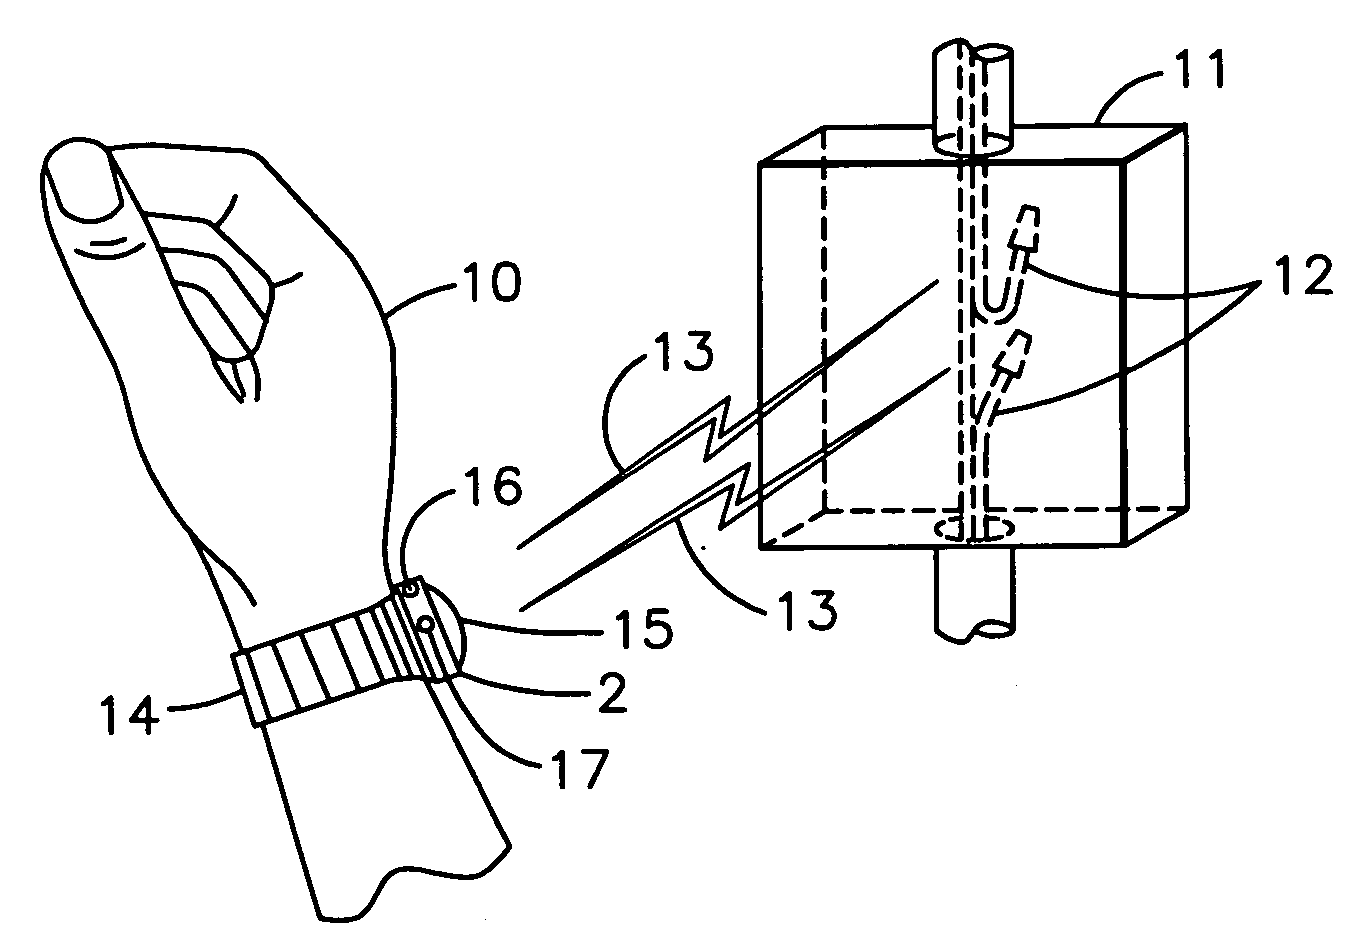 Wrist-wearable electrical detection device